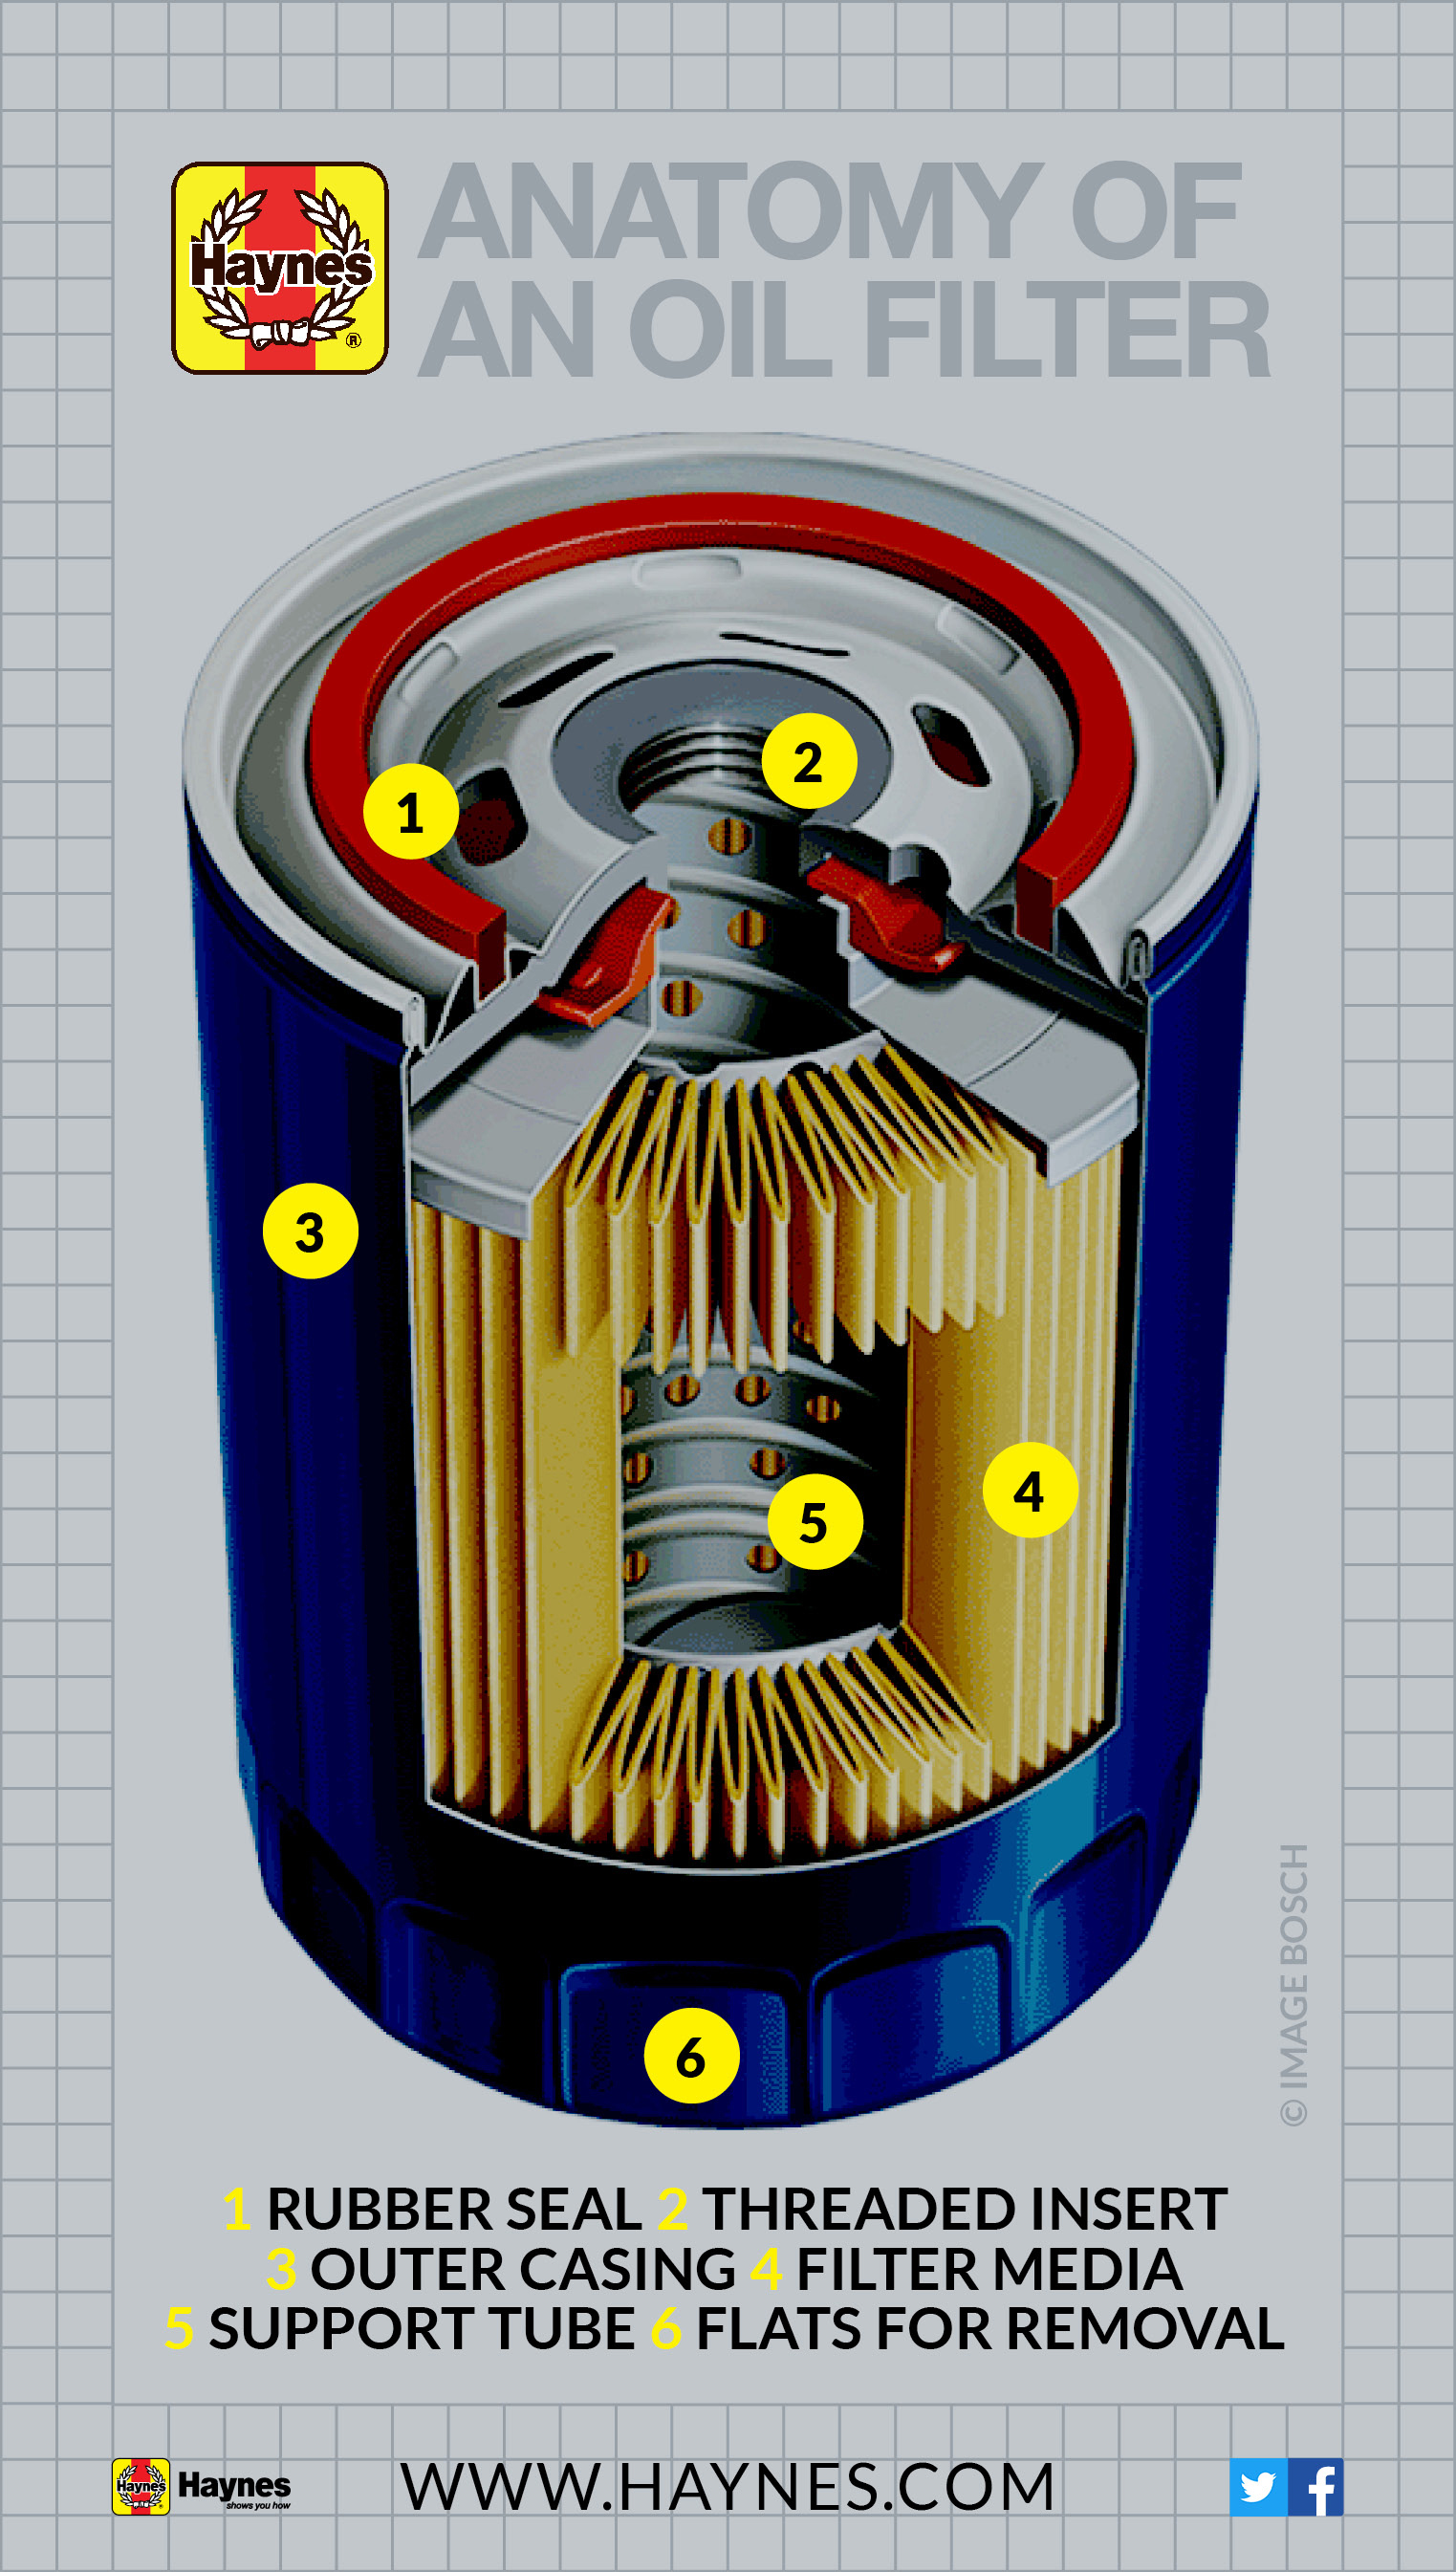 Anatomy of an oil filter